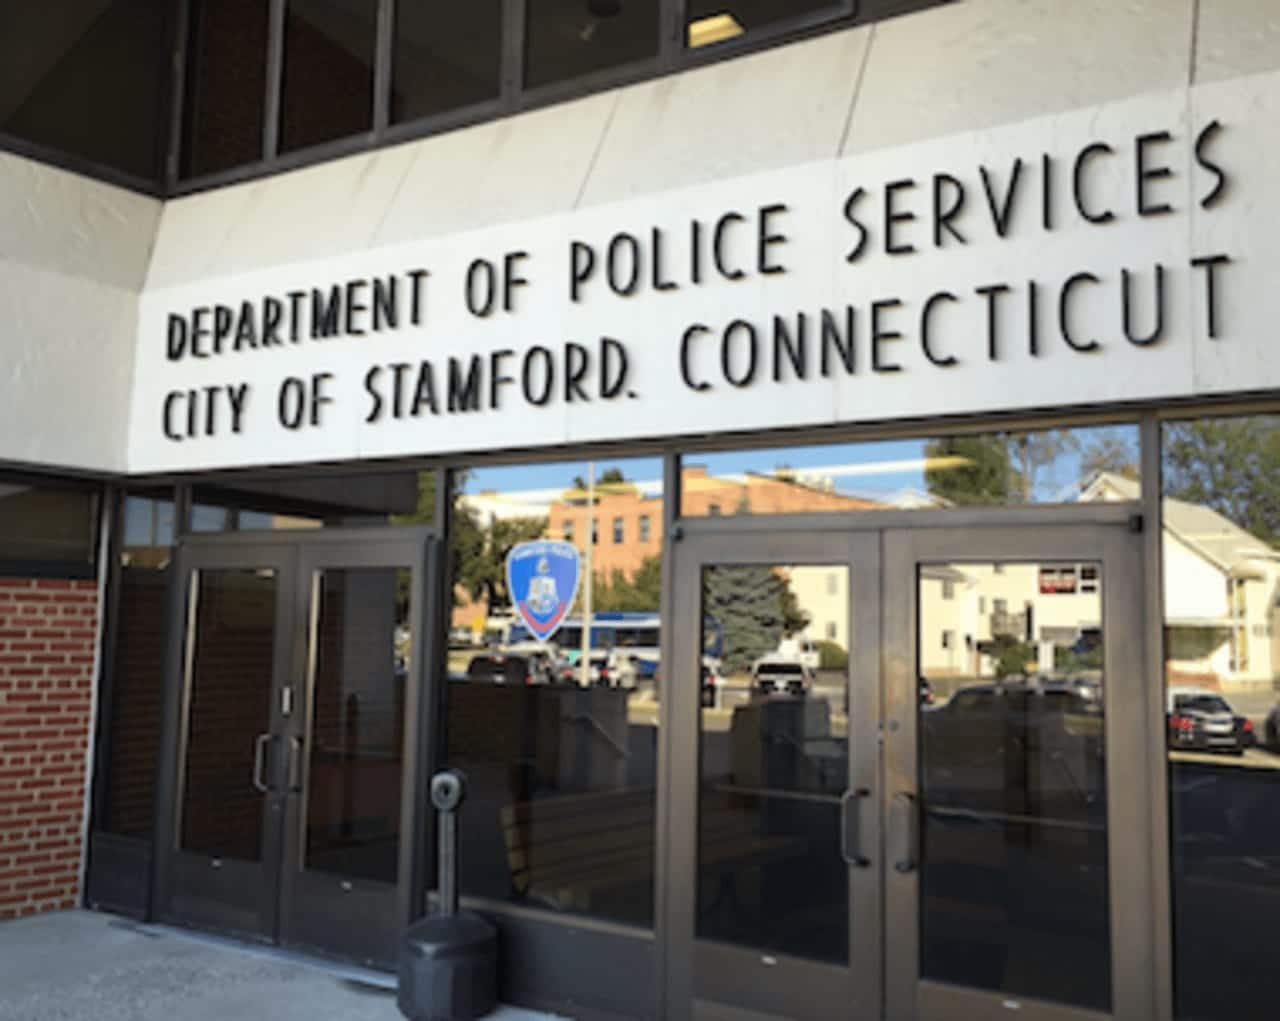 Stamford Police arrested a man after a confrontation with an officer responding to a leaves burning call.